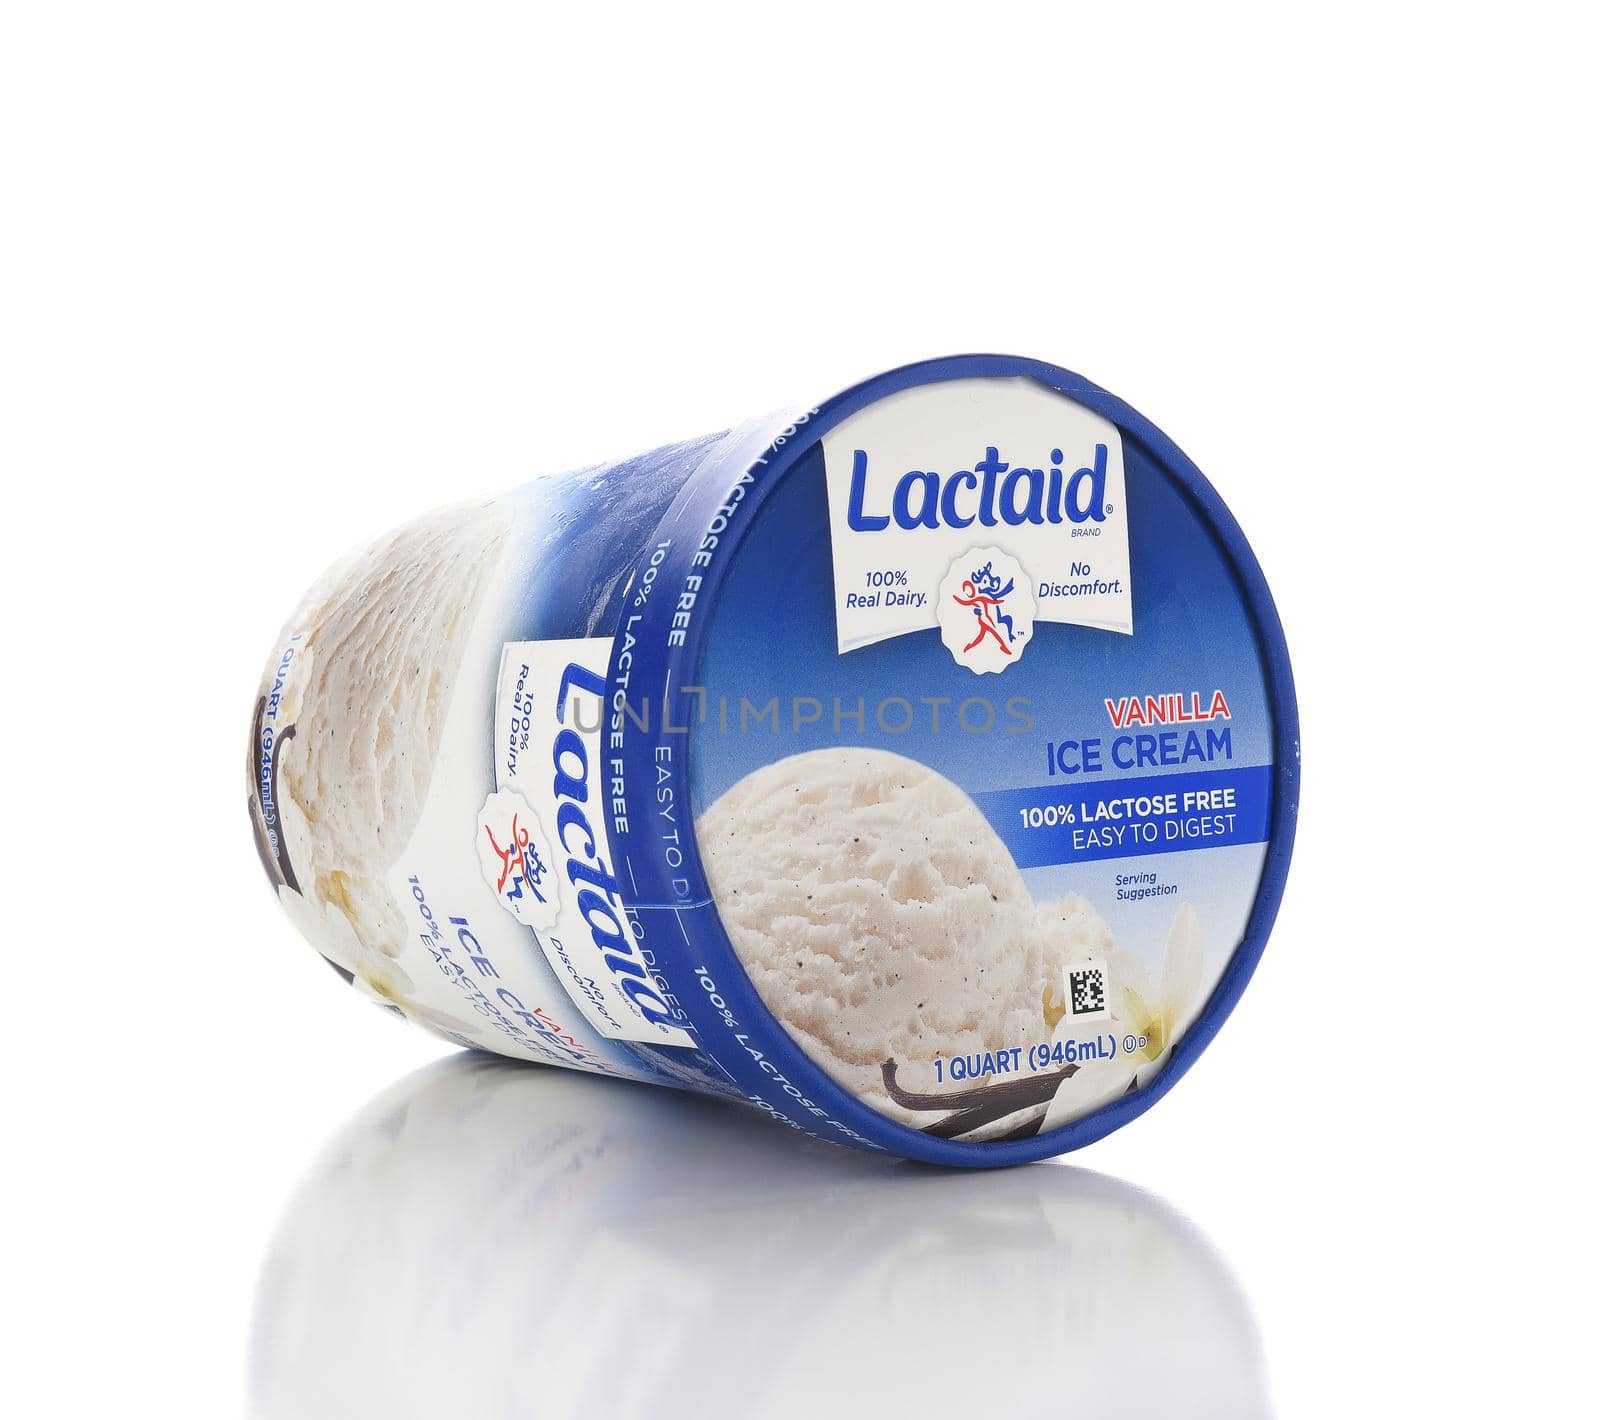 IRVINE, CALIFORNIA - NOVEMBER 16, 2016: A  carton of Lactaid Lactose Free Vanilla Ice Cream. Lactaid makes a full line of lactose free dairy products that can be enjoyed without stomach discomfort.